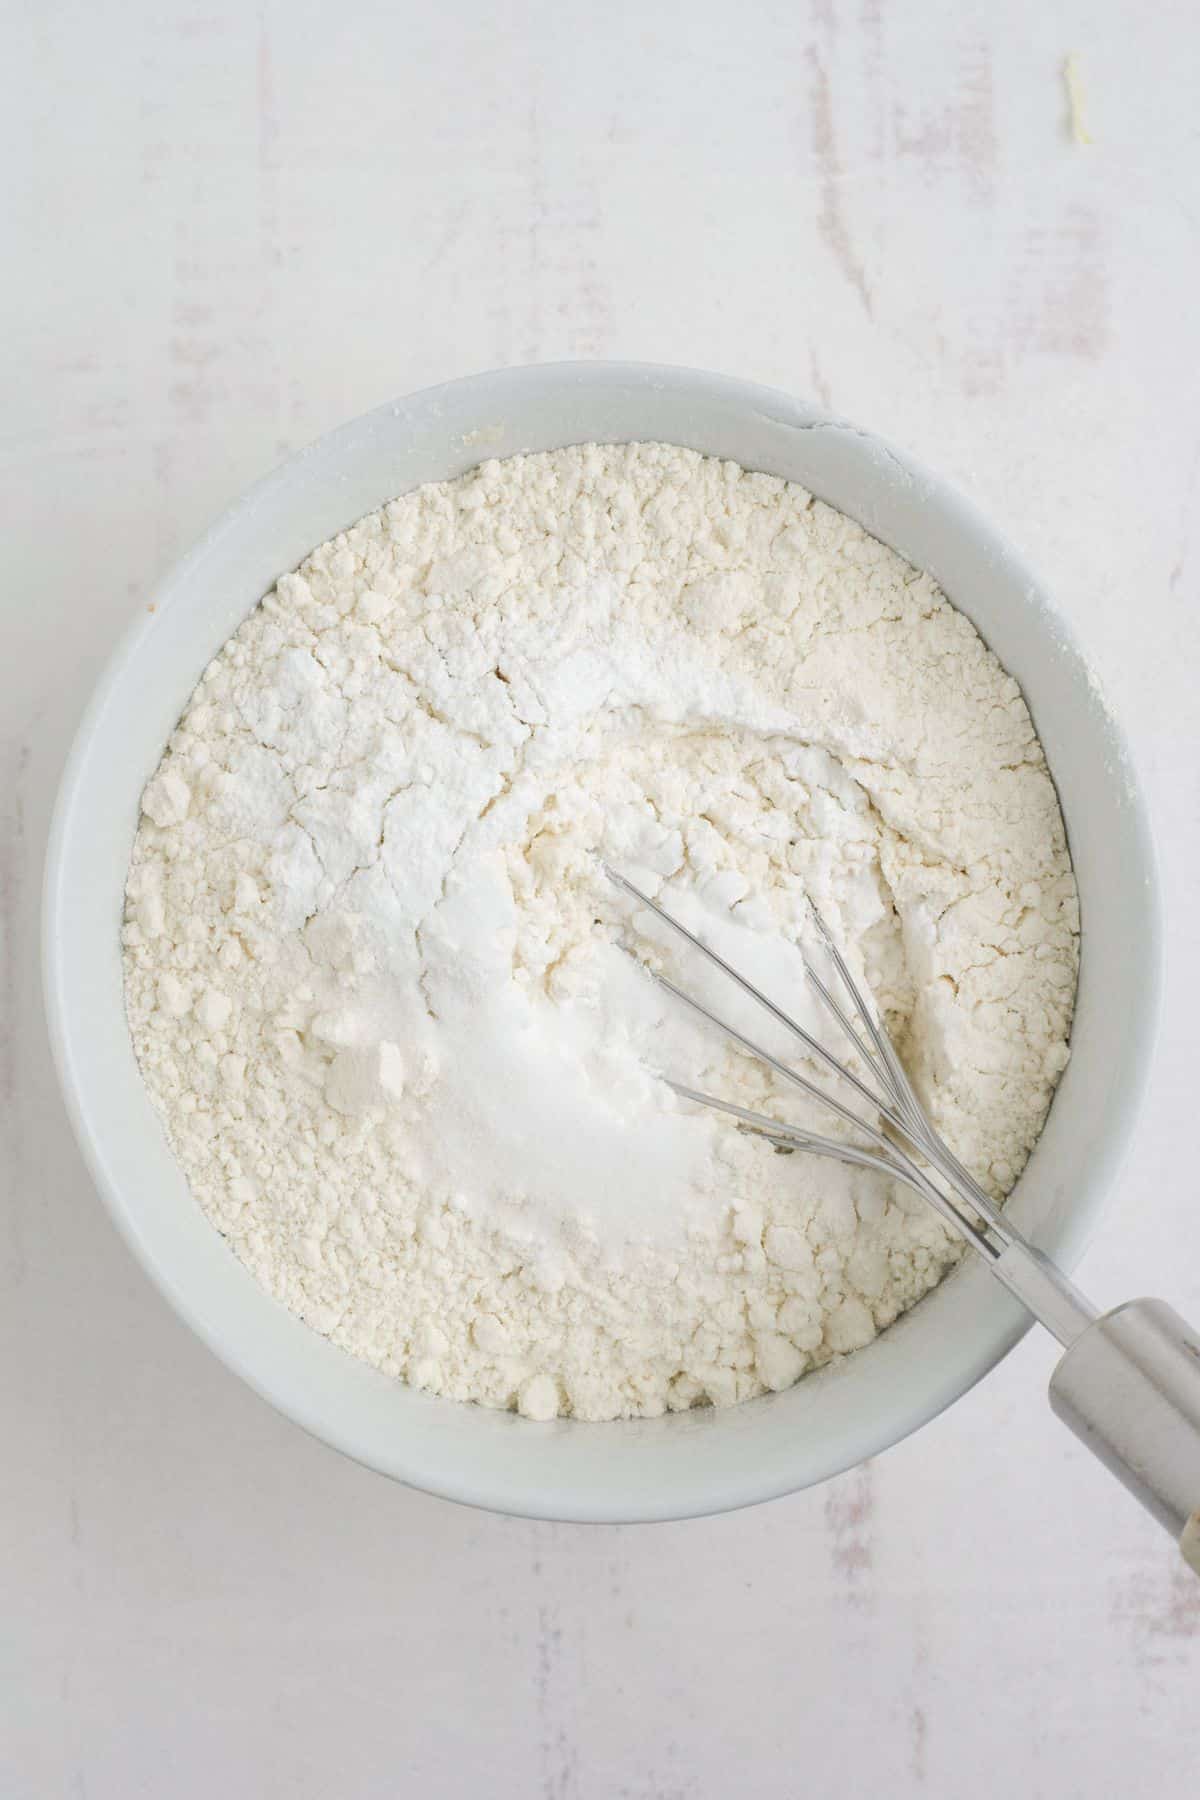 Mixing the dry ingredients together in a separate bowl.